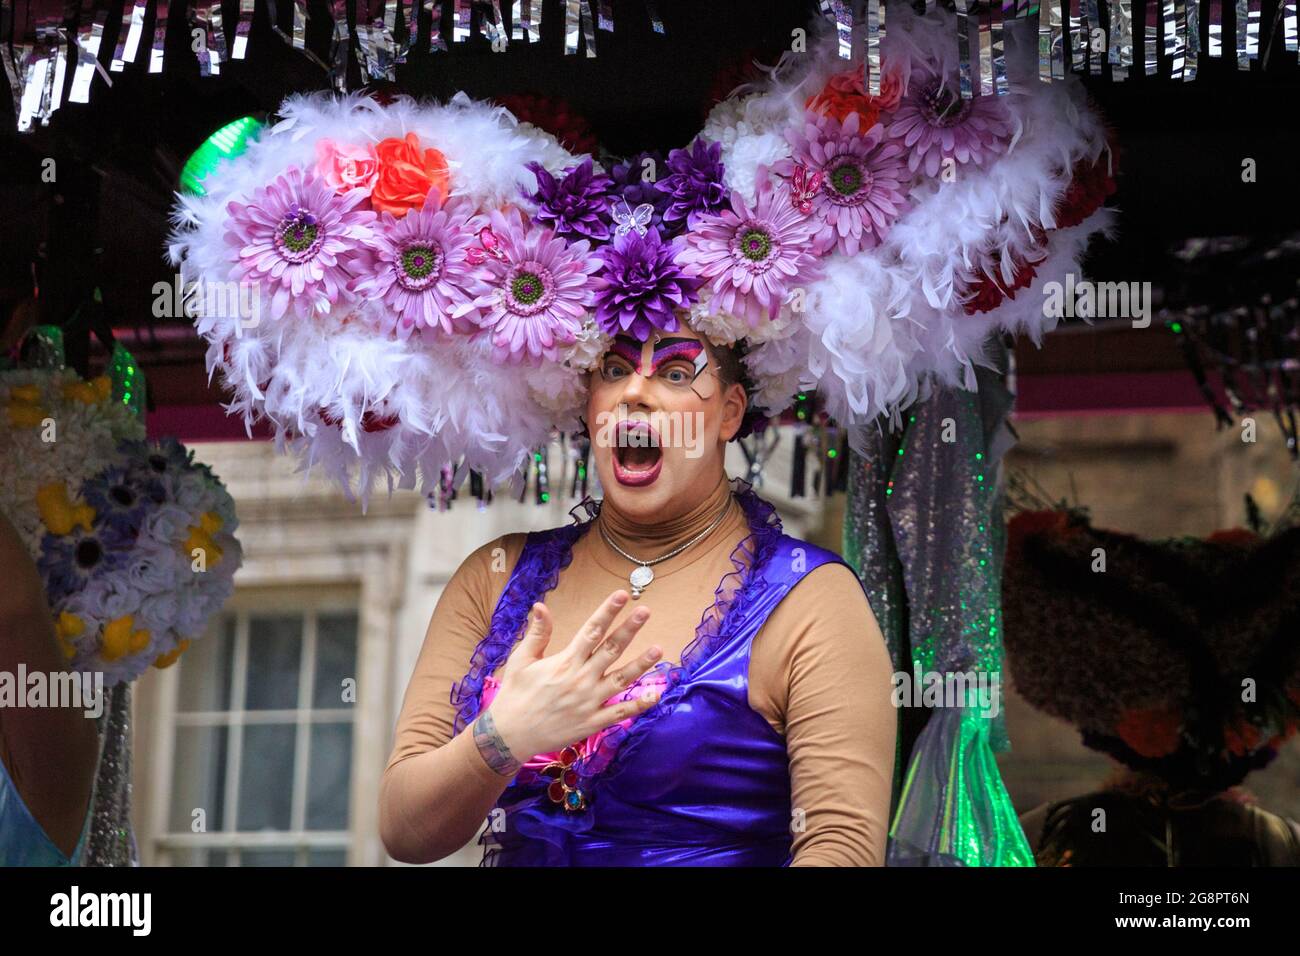 Participant in costume on the 'Priscilla, Queen of the Desert' float for the Borough of Hillingdon, London New Year's Day Parade (LNYPD), England Stock Photo